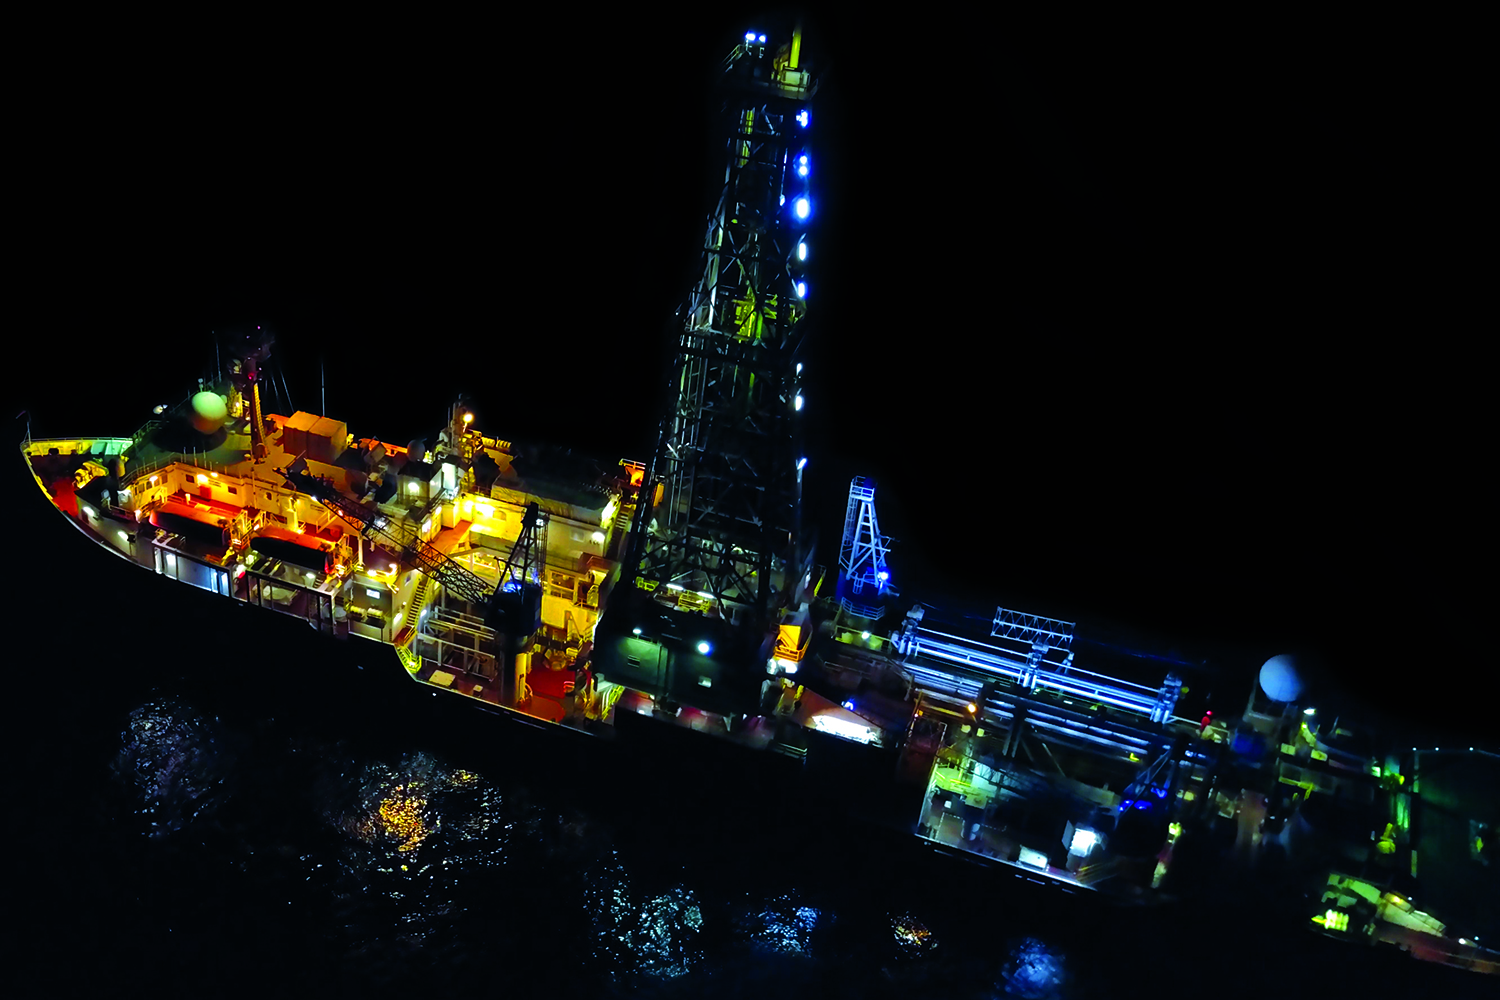 Night vision of the scientific drillship JOIDES Resolution that recovered multimillion year past climate archives for the bottom of the world oceans. Photo: Adam Kurtz